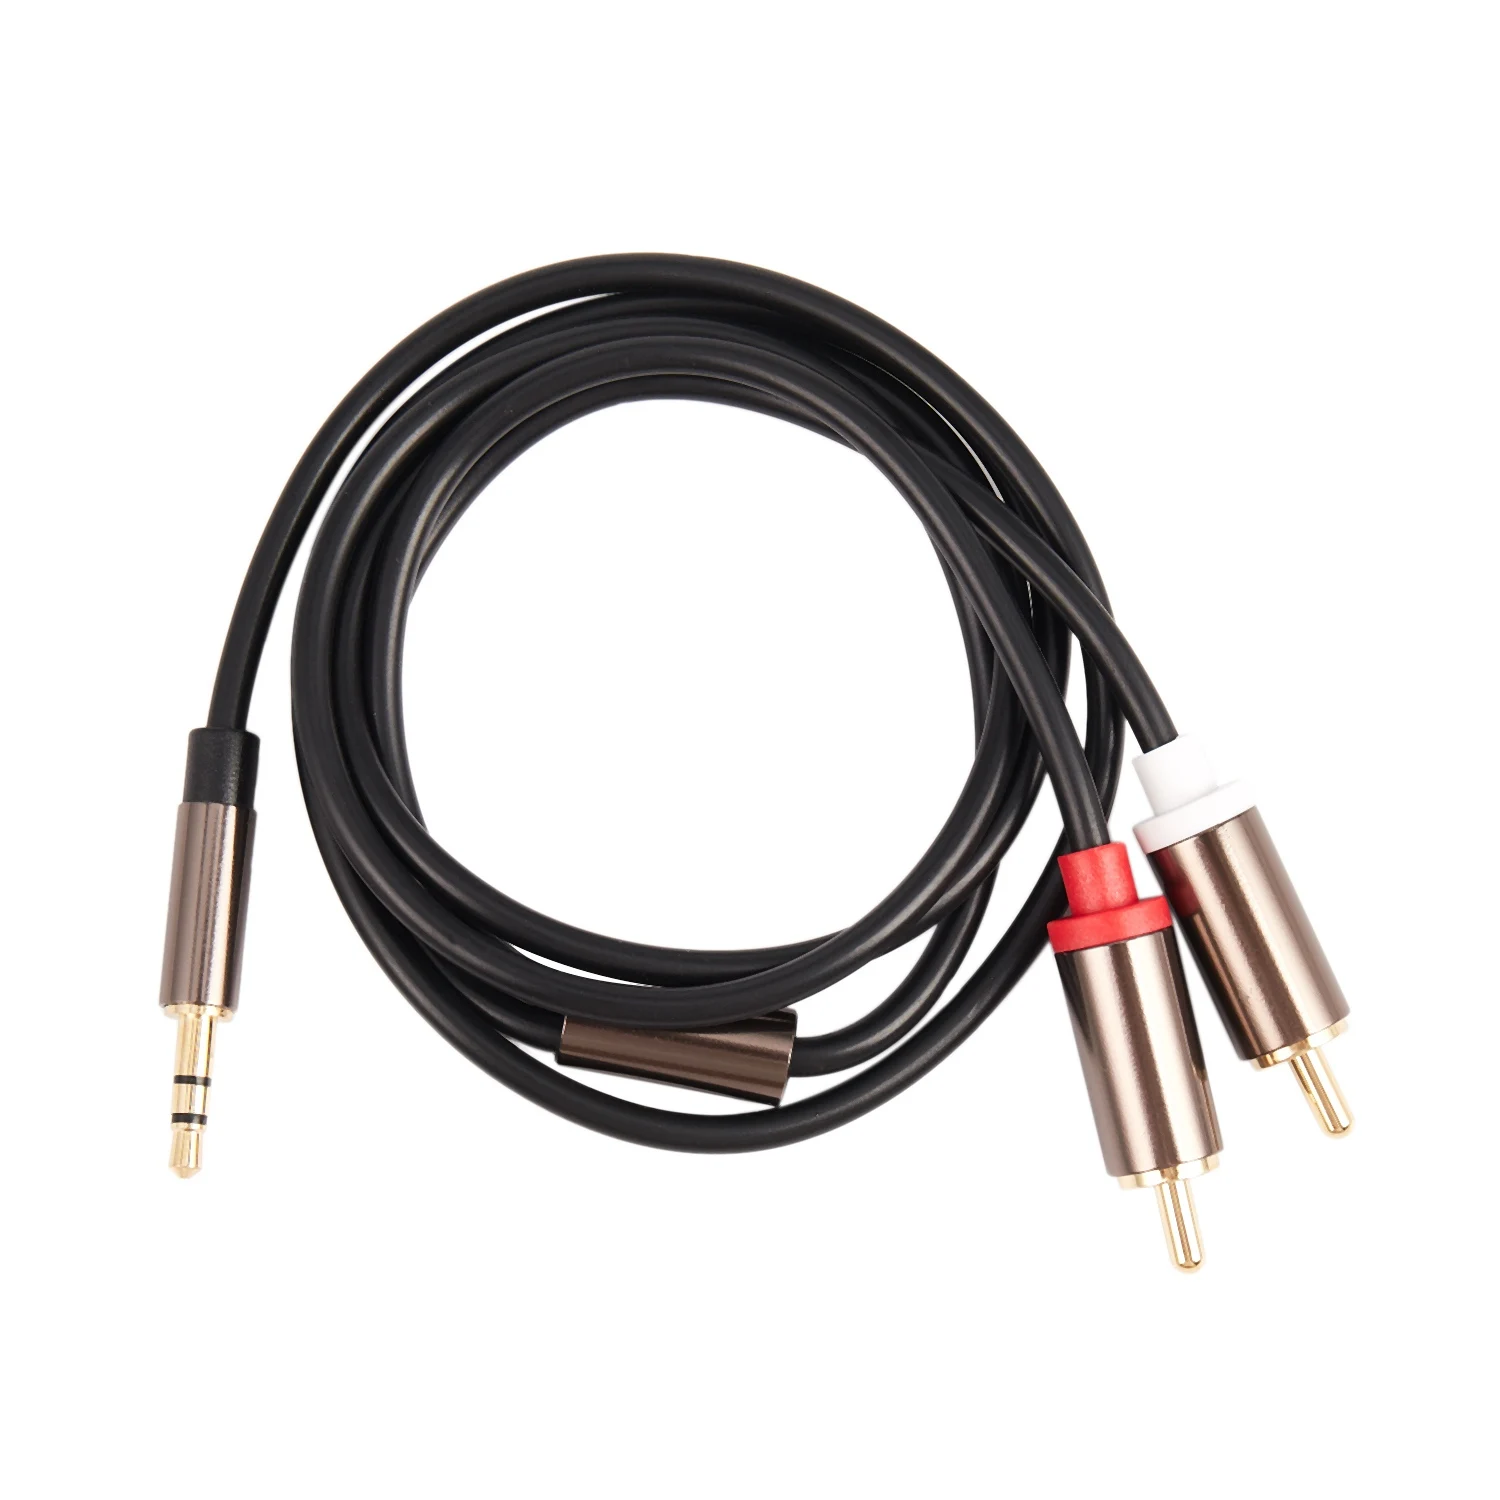 

Jack 3.5mm to 2 RCA Audio Cable AUX Splitter 3.5mm Stereo Male to Male RCA Adapter 2 Speaker Cable 1m